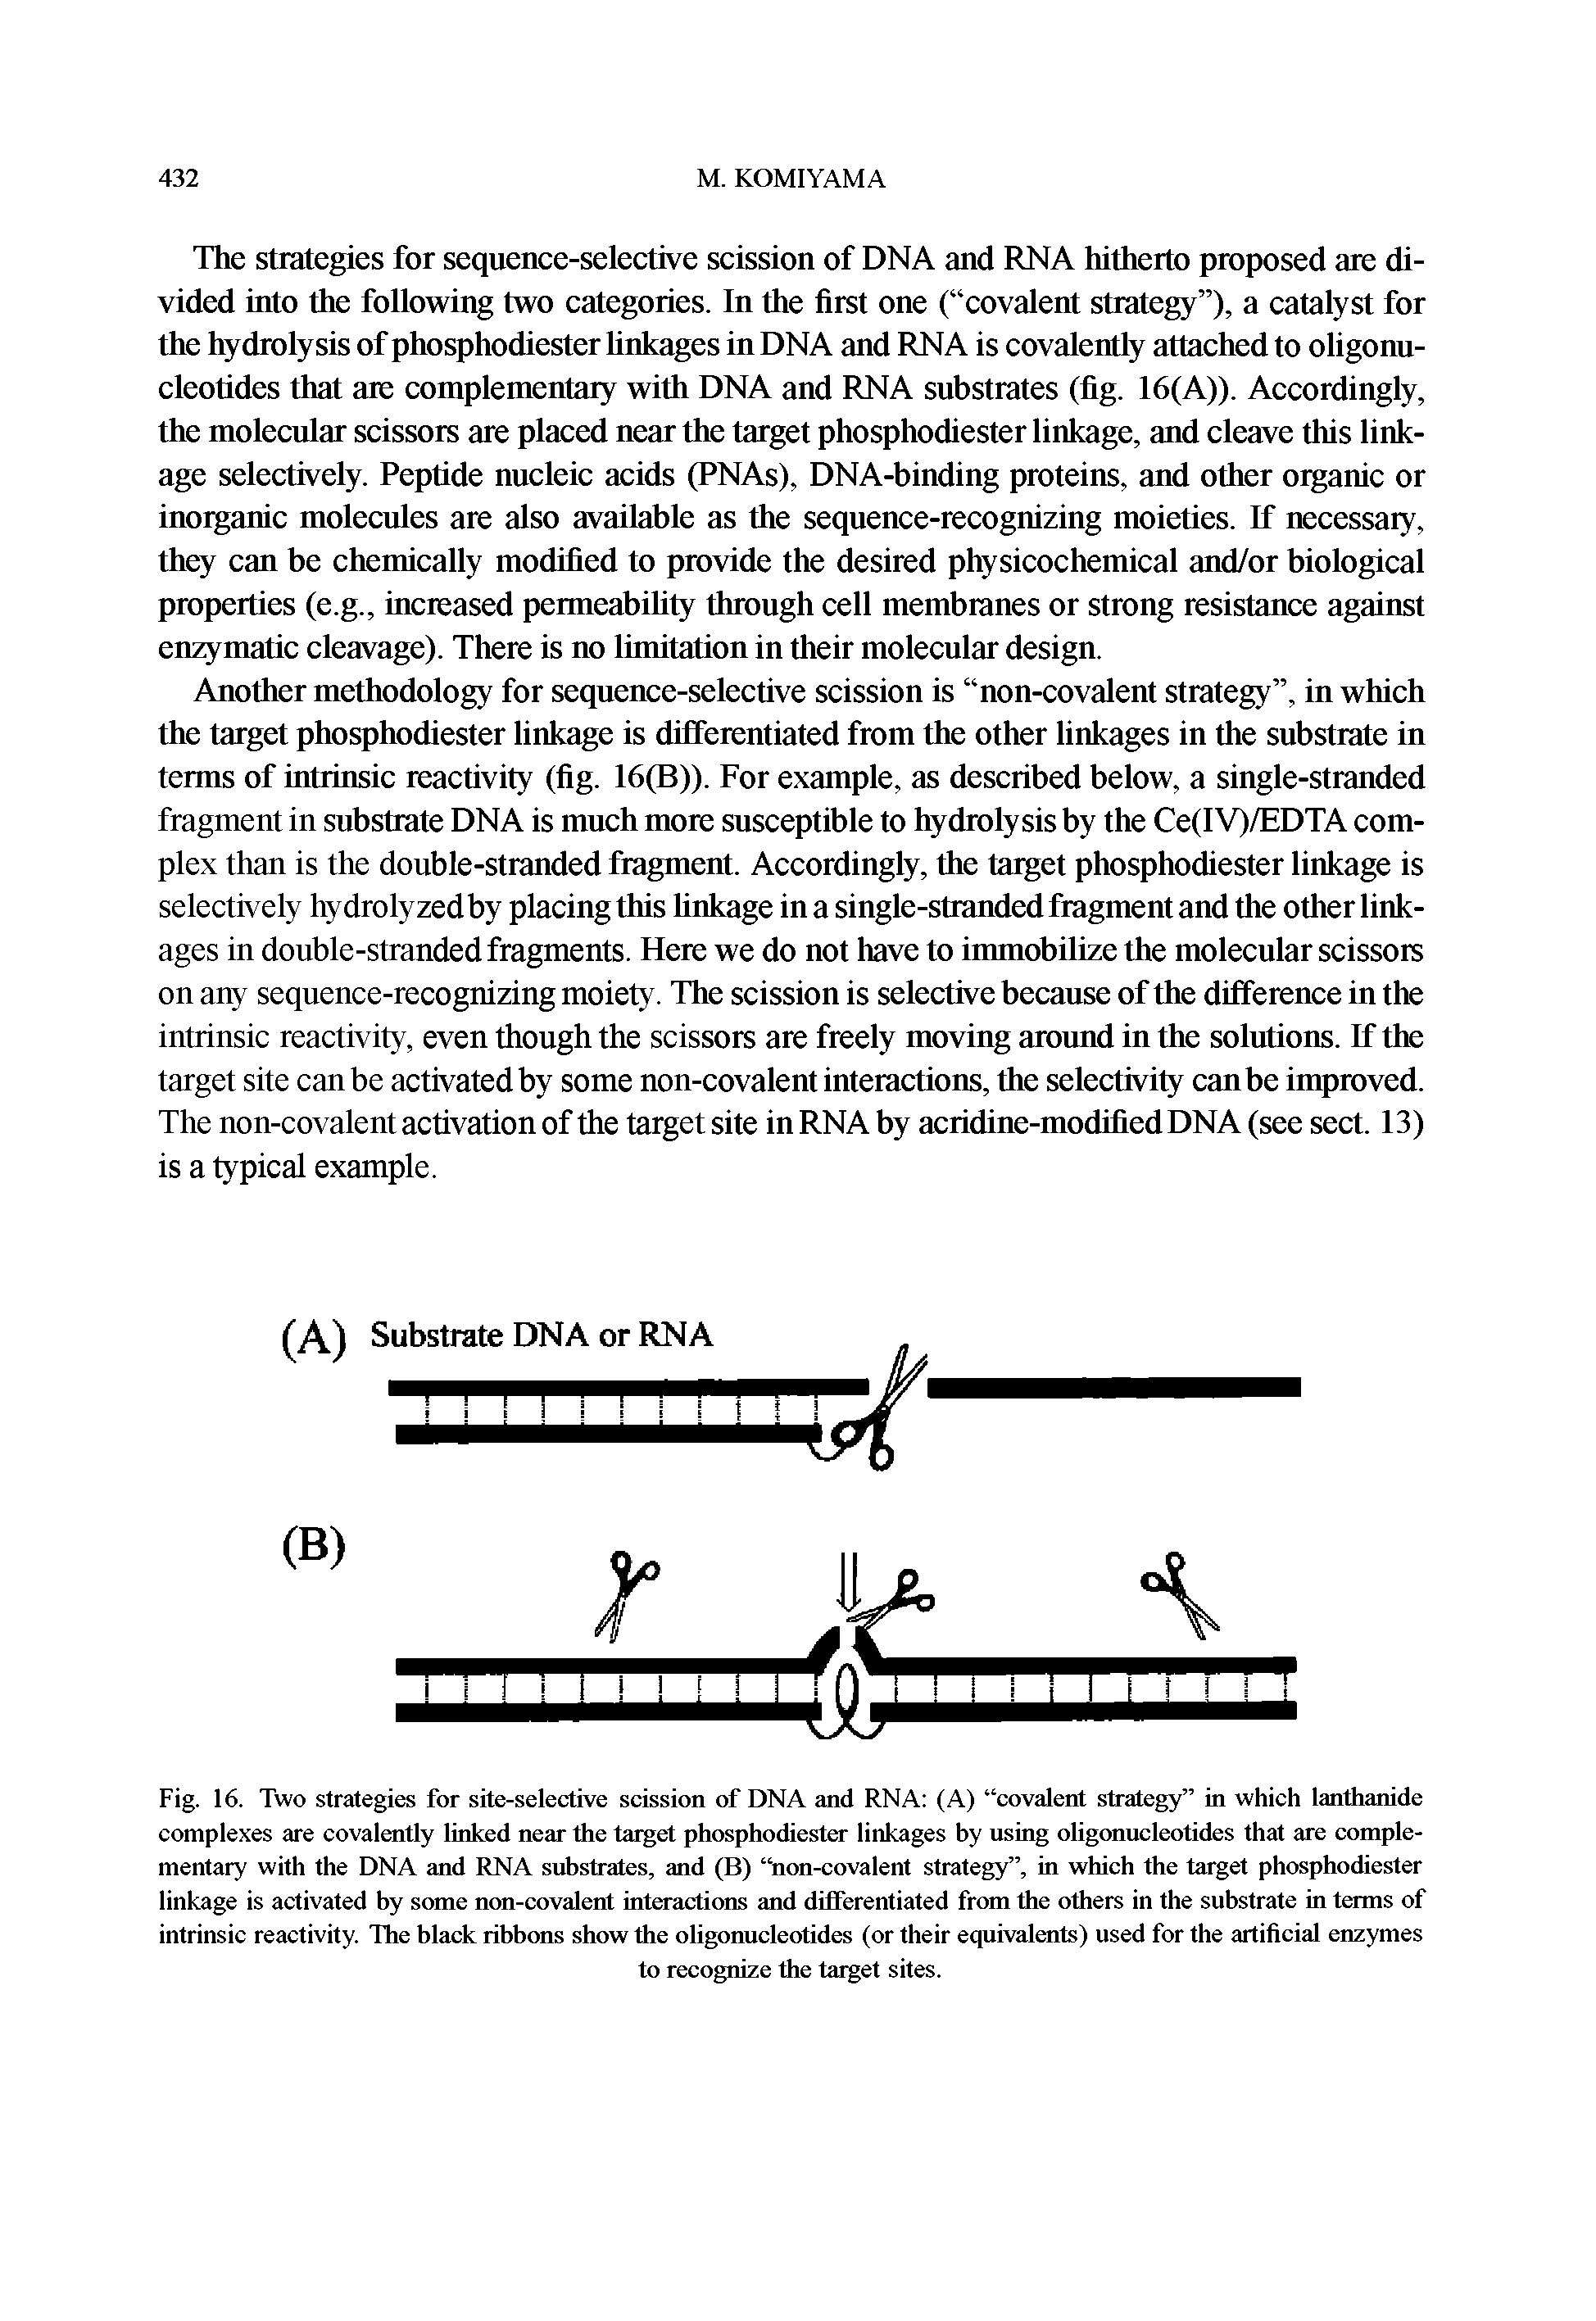 Fig. 16. Two strategies for site-selective scission of DNA and RNA (A) covalent strategy in which lanthanide complexes are covalently linked near the target phosphodiester linkages by using oligonucleotides that are complementary with the DNA and RNA substrates, and (B) non-covalent strategy , in which the target phosphodiester linkage is activated by some non-covalent interactions and dilferentiated from the others in the substrate in terms of intrinsic reactivity. The black ribbons show the oligonucleotides (or their equivalents) used for the artificial enzymes...